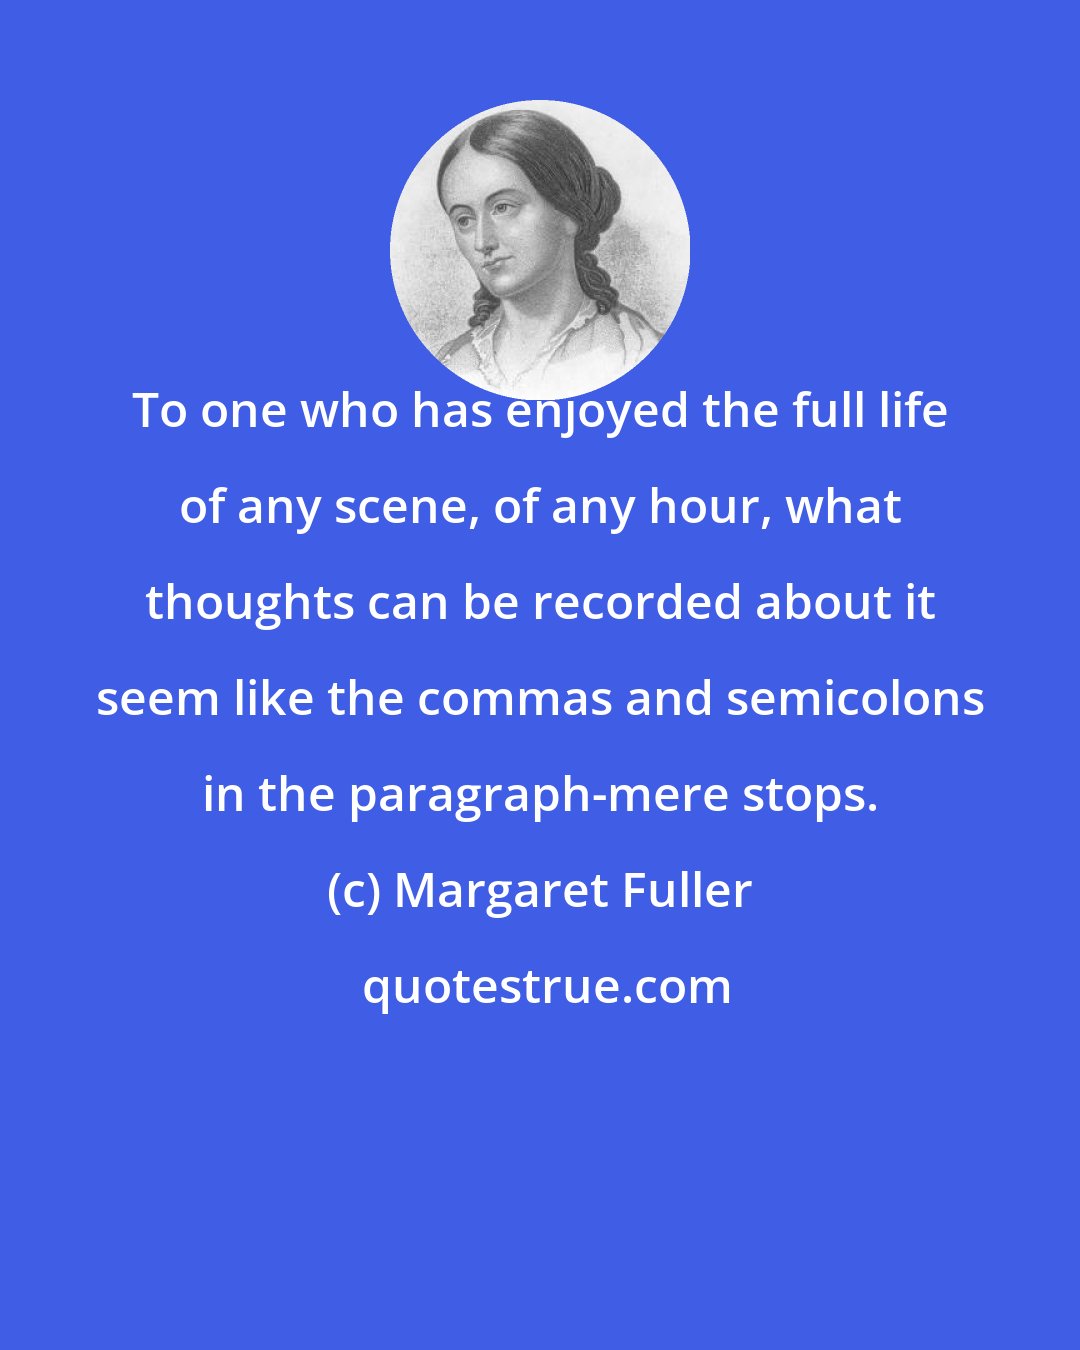 Margaret Fuller: To one who has enjoyed the full life of any scene, of any hour, what thoughts can be recorded about it seem like the commas and semicolons in the paragraph-mere stops.